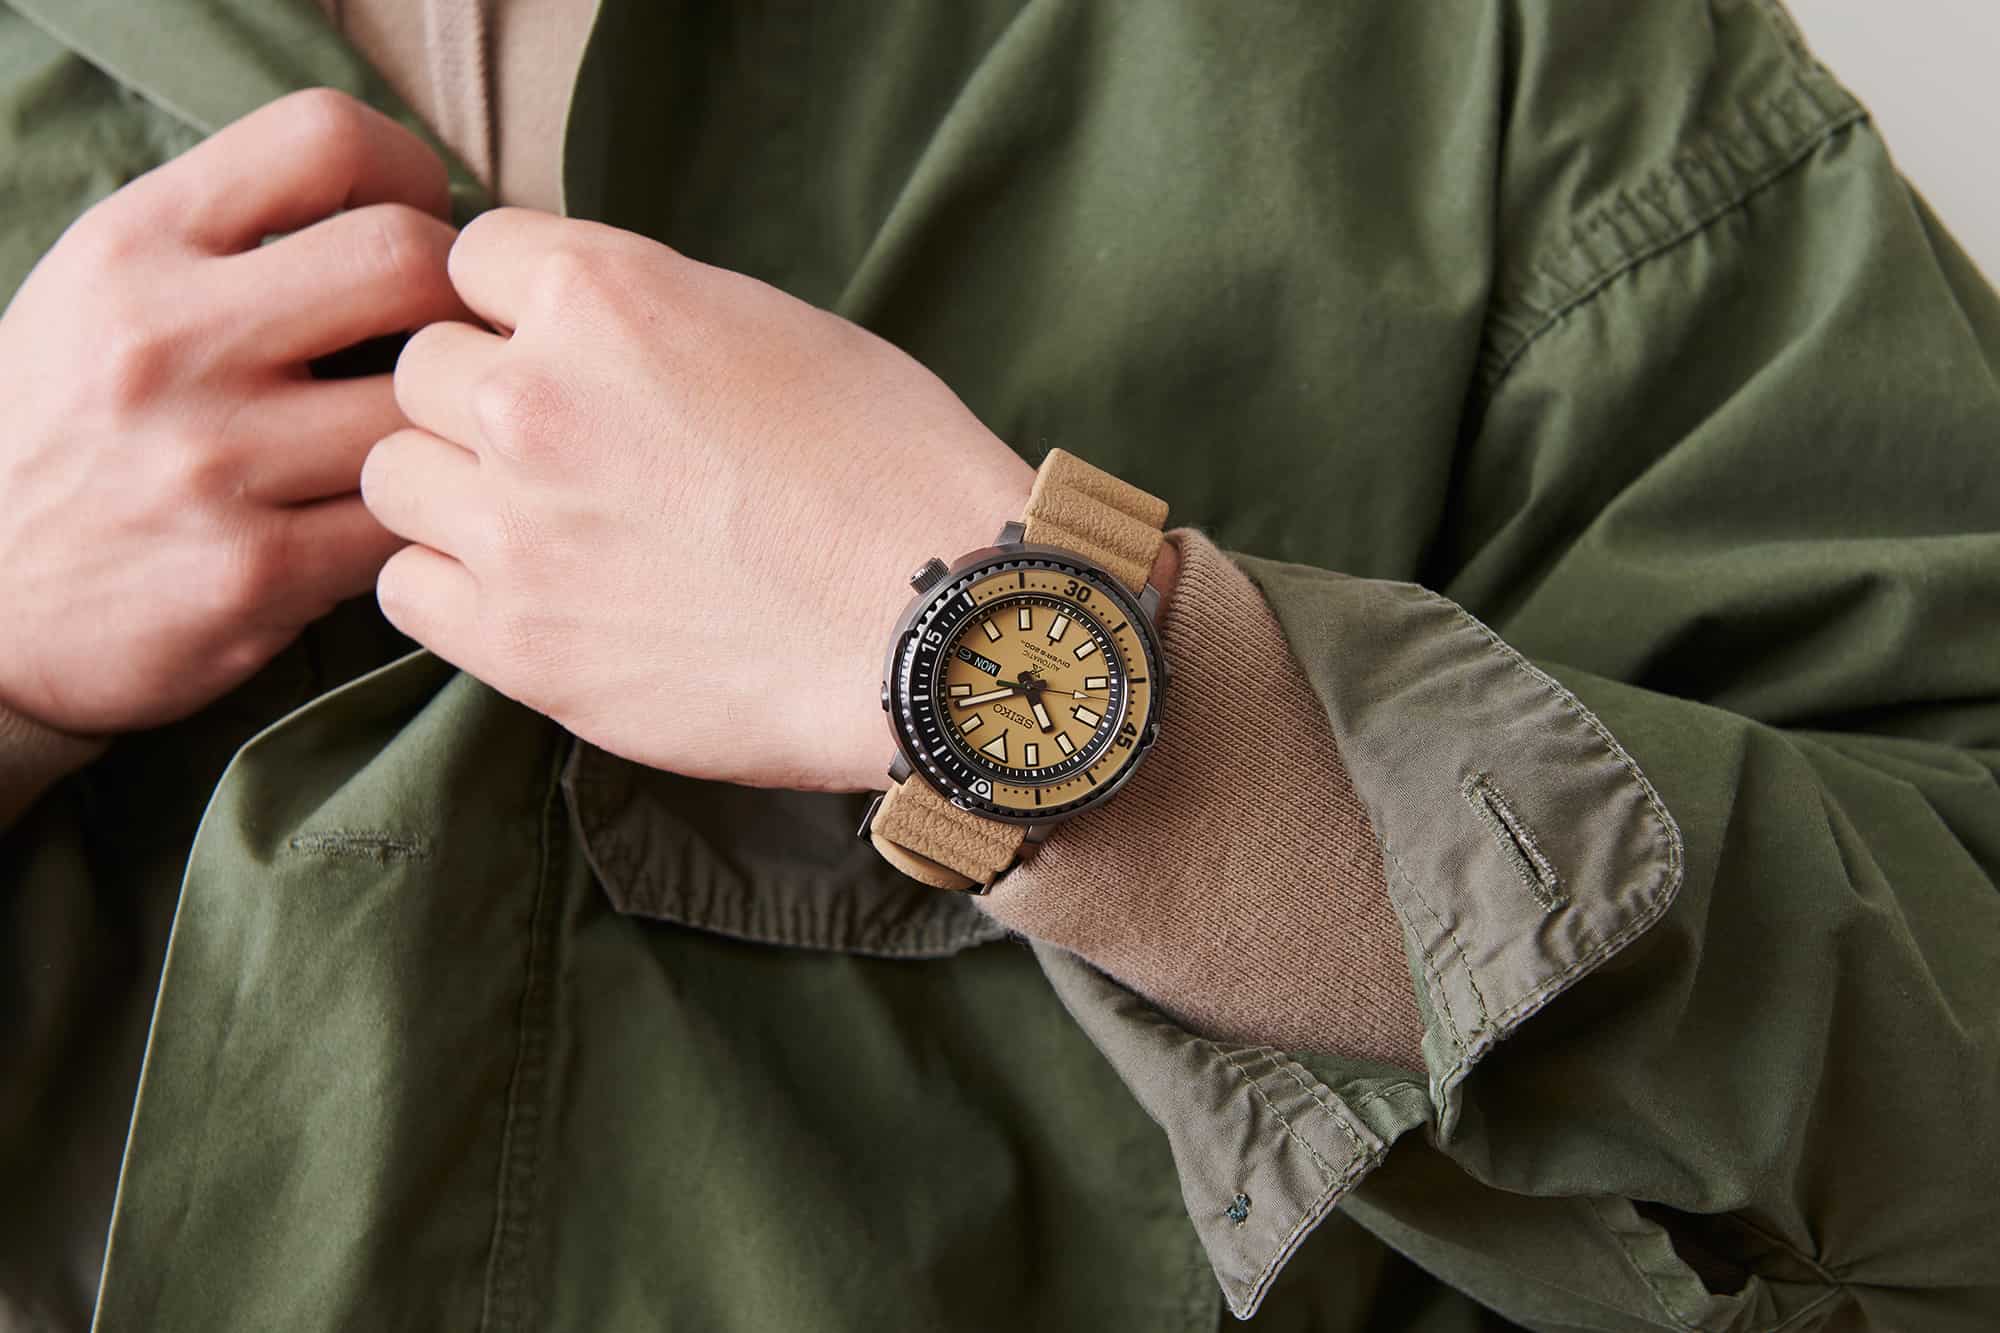 Seiko Goes on Safari with new Street Series Offerings - Worn & Wound